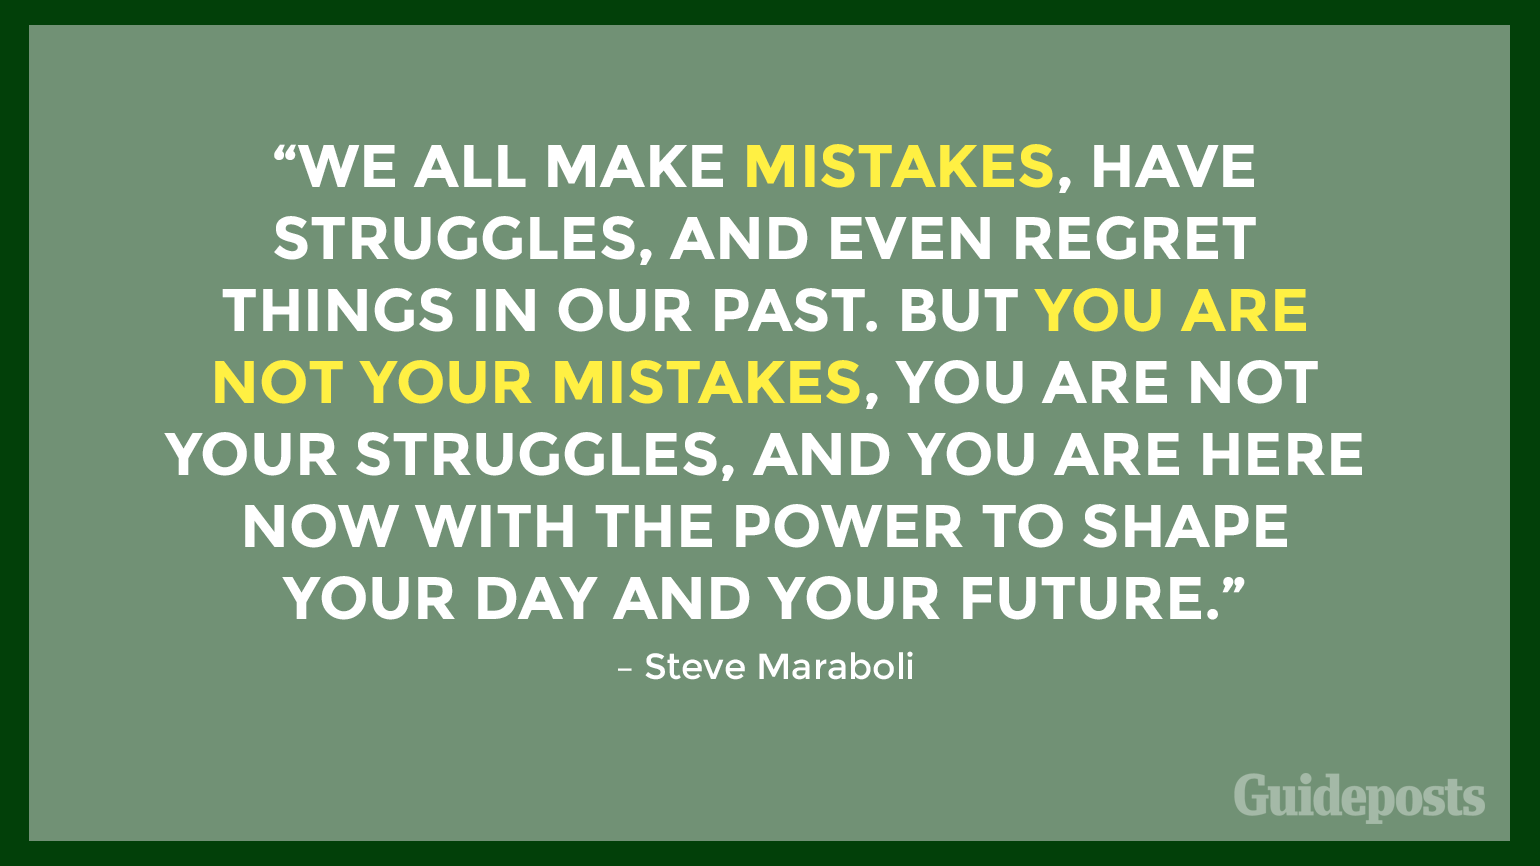 “We all make mistakes, have struggles, and even regret things in our past. But you are not your mistakes, you are not your struggles, and you are here now with the power to shape your day and your future.” – Steve Maraboli